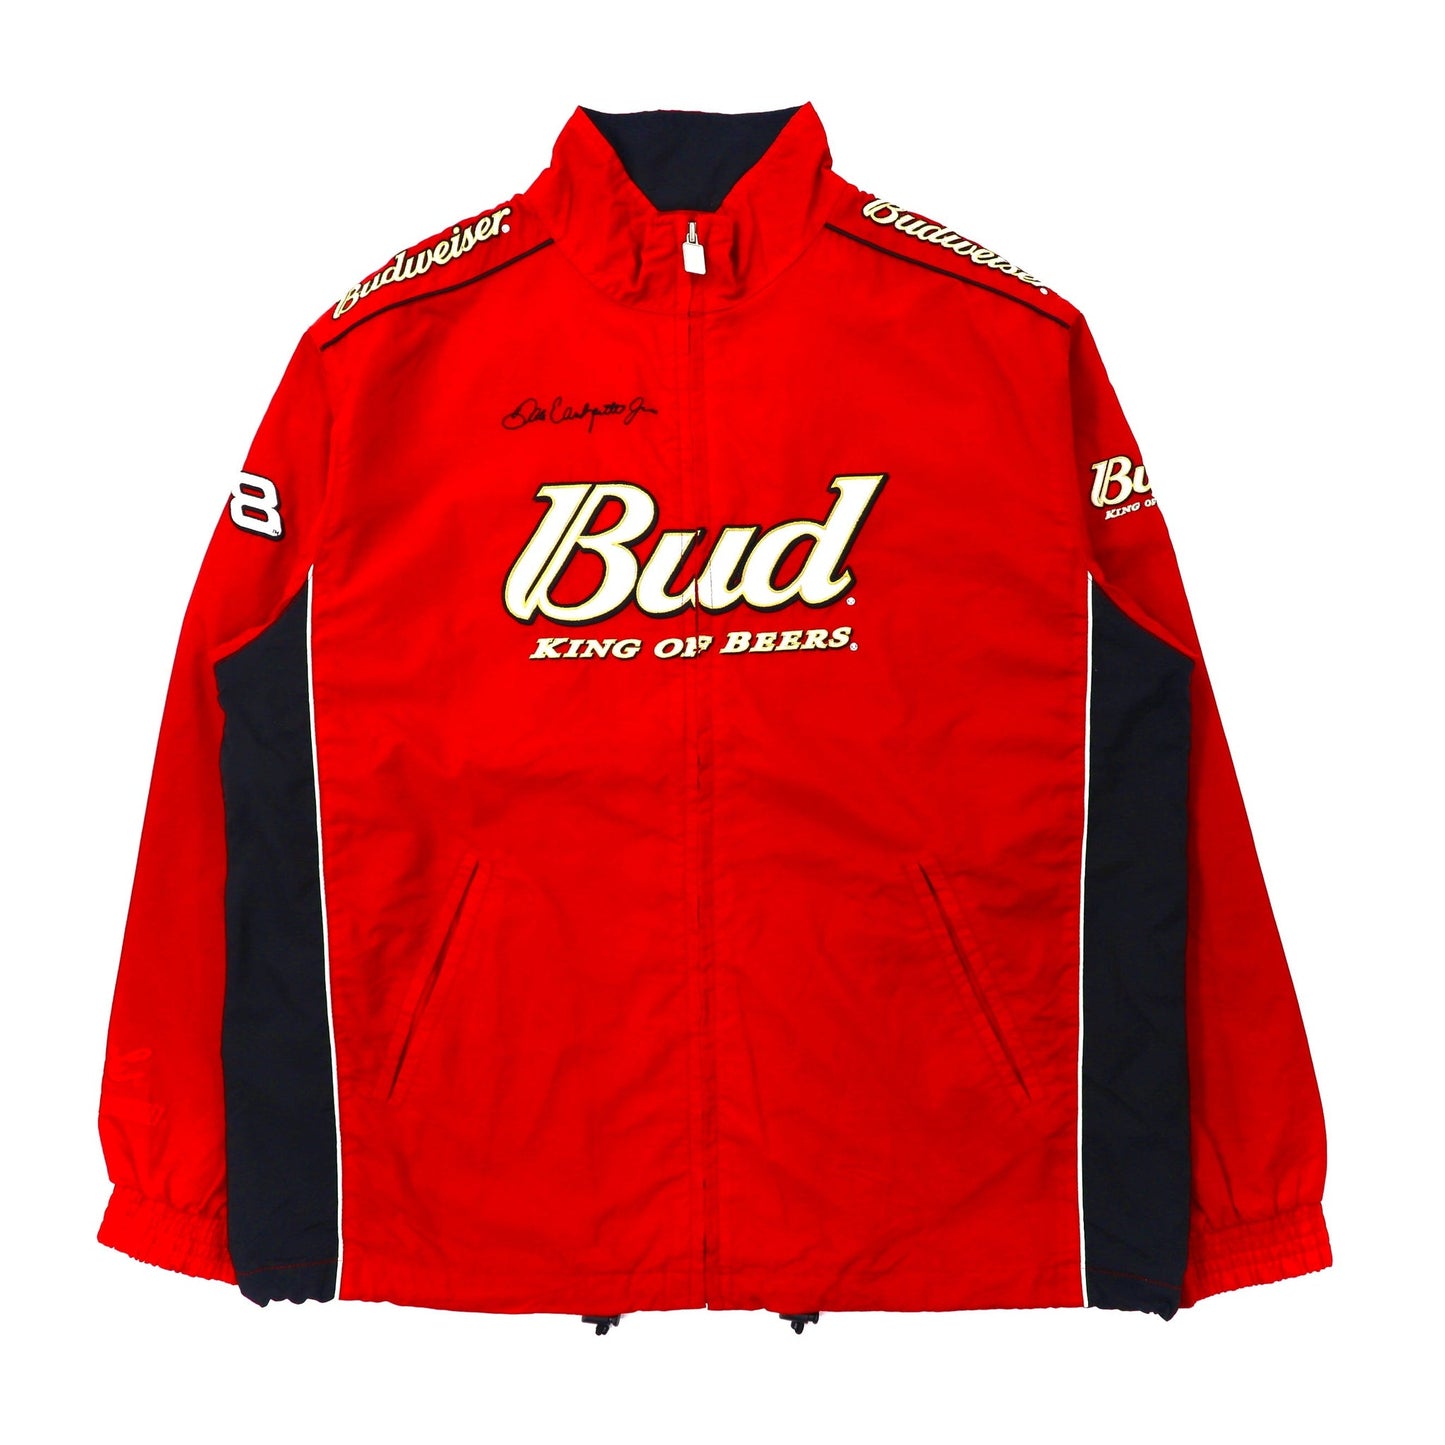 CHASE AUTHENTICS Racing Jacket M Red Nylon Budweiser Embroidery 